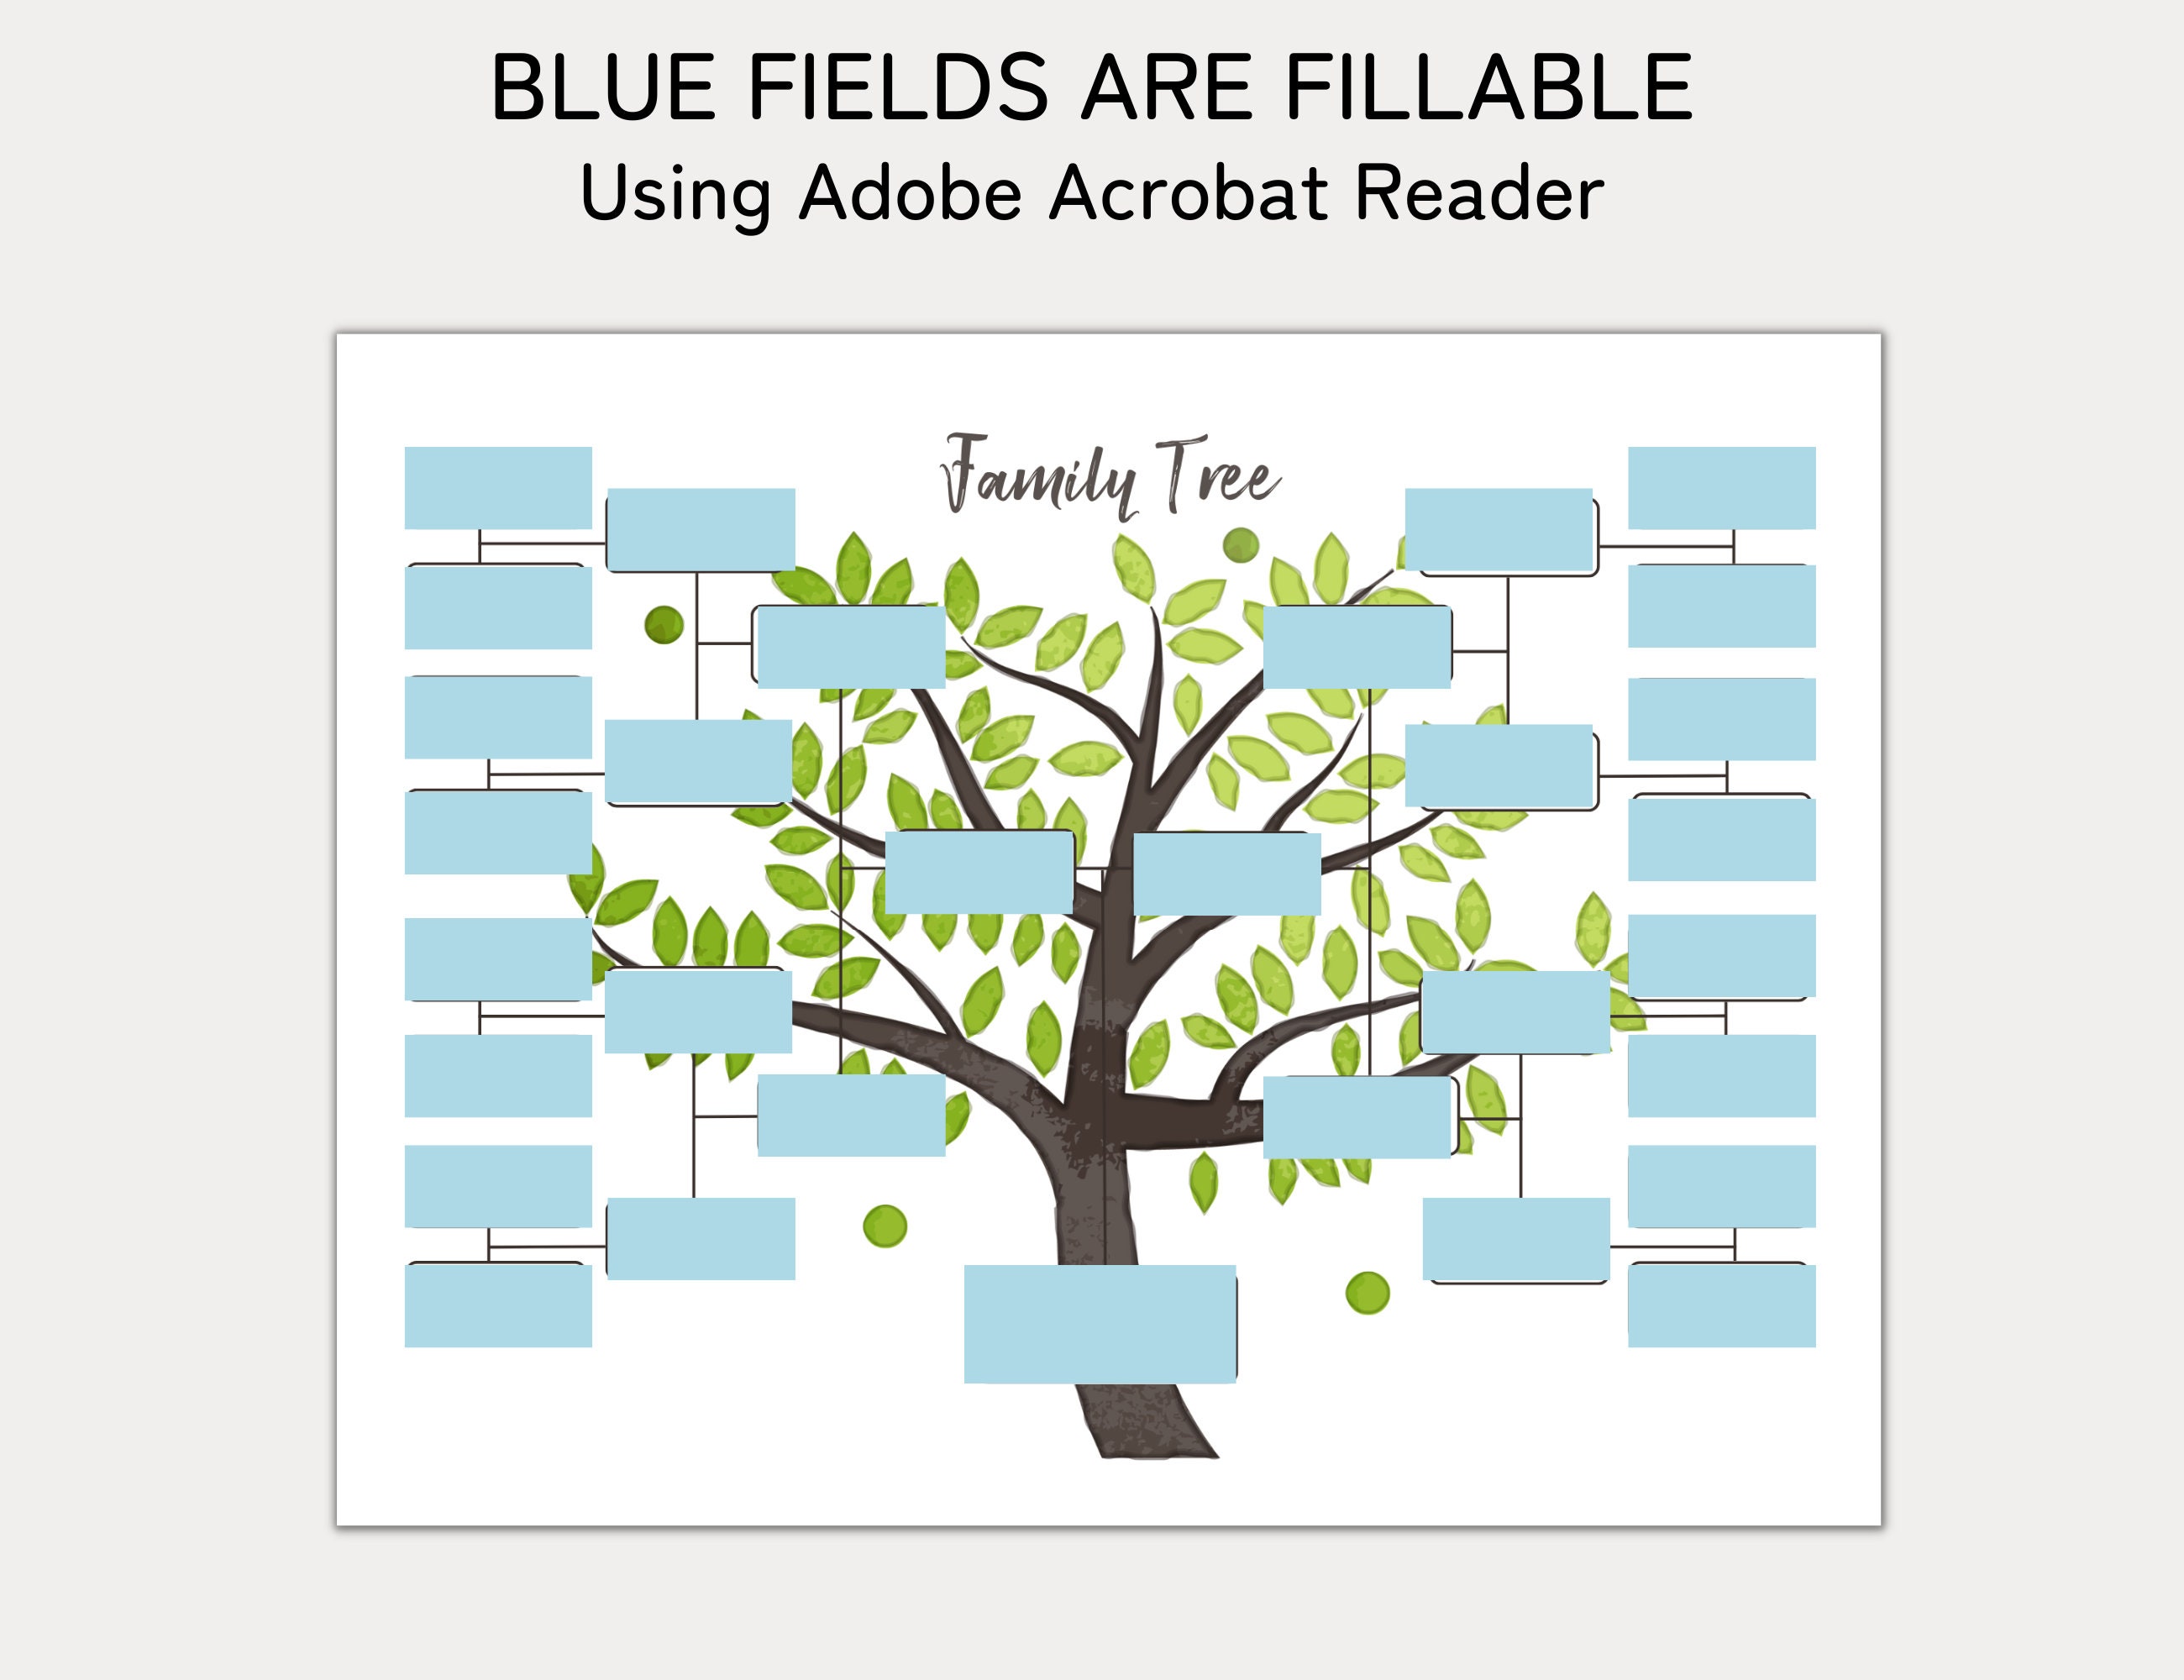 Five Family Tree Charts To Fill In - A Genealogy Organizer For 5 Families:  Designed To Compile Family History Of 5 Families; Genealogy Gift For Family